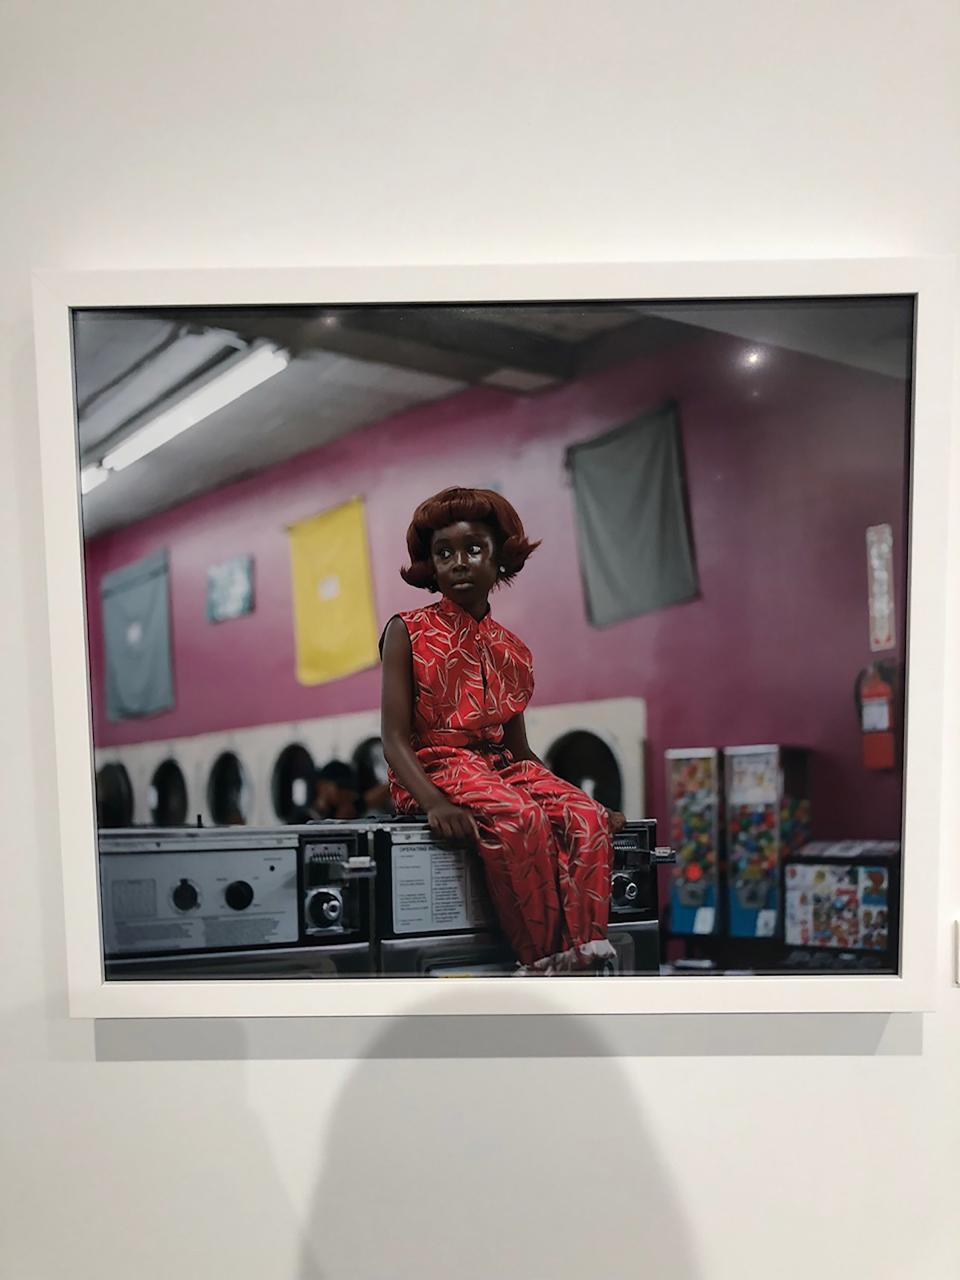 Finished off my last few minutes in New York before I jumped on the plane️ by visiting a beautiful photo exhibition, Peluca, by the amazing Renell Medrano at Milk Studios. Her photos are spectacular, and wow, what a beautifully curated set of works! If you’re in New York, you definitely need to stop by and see it!